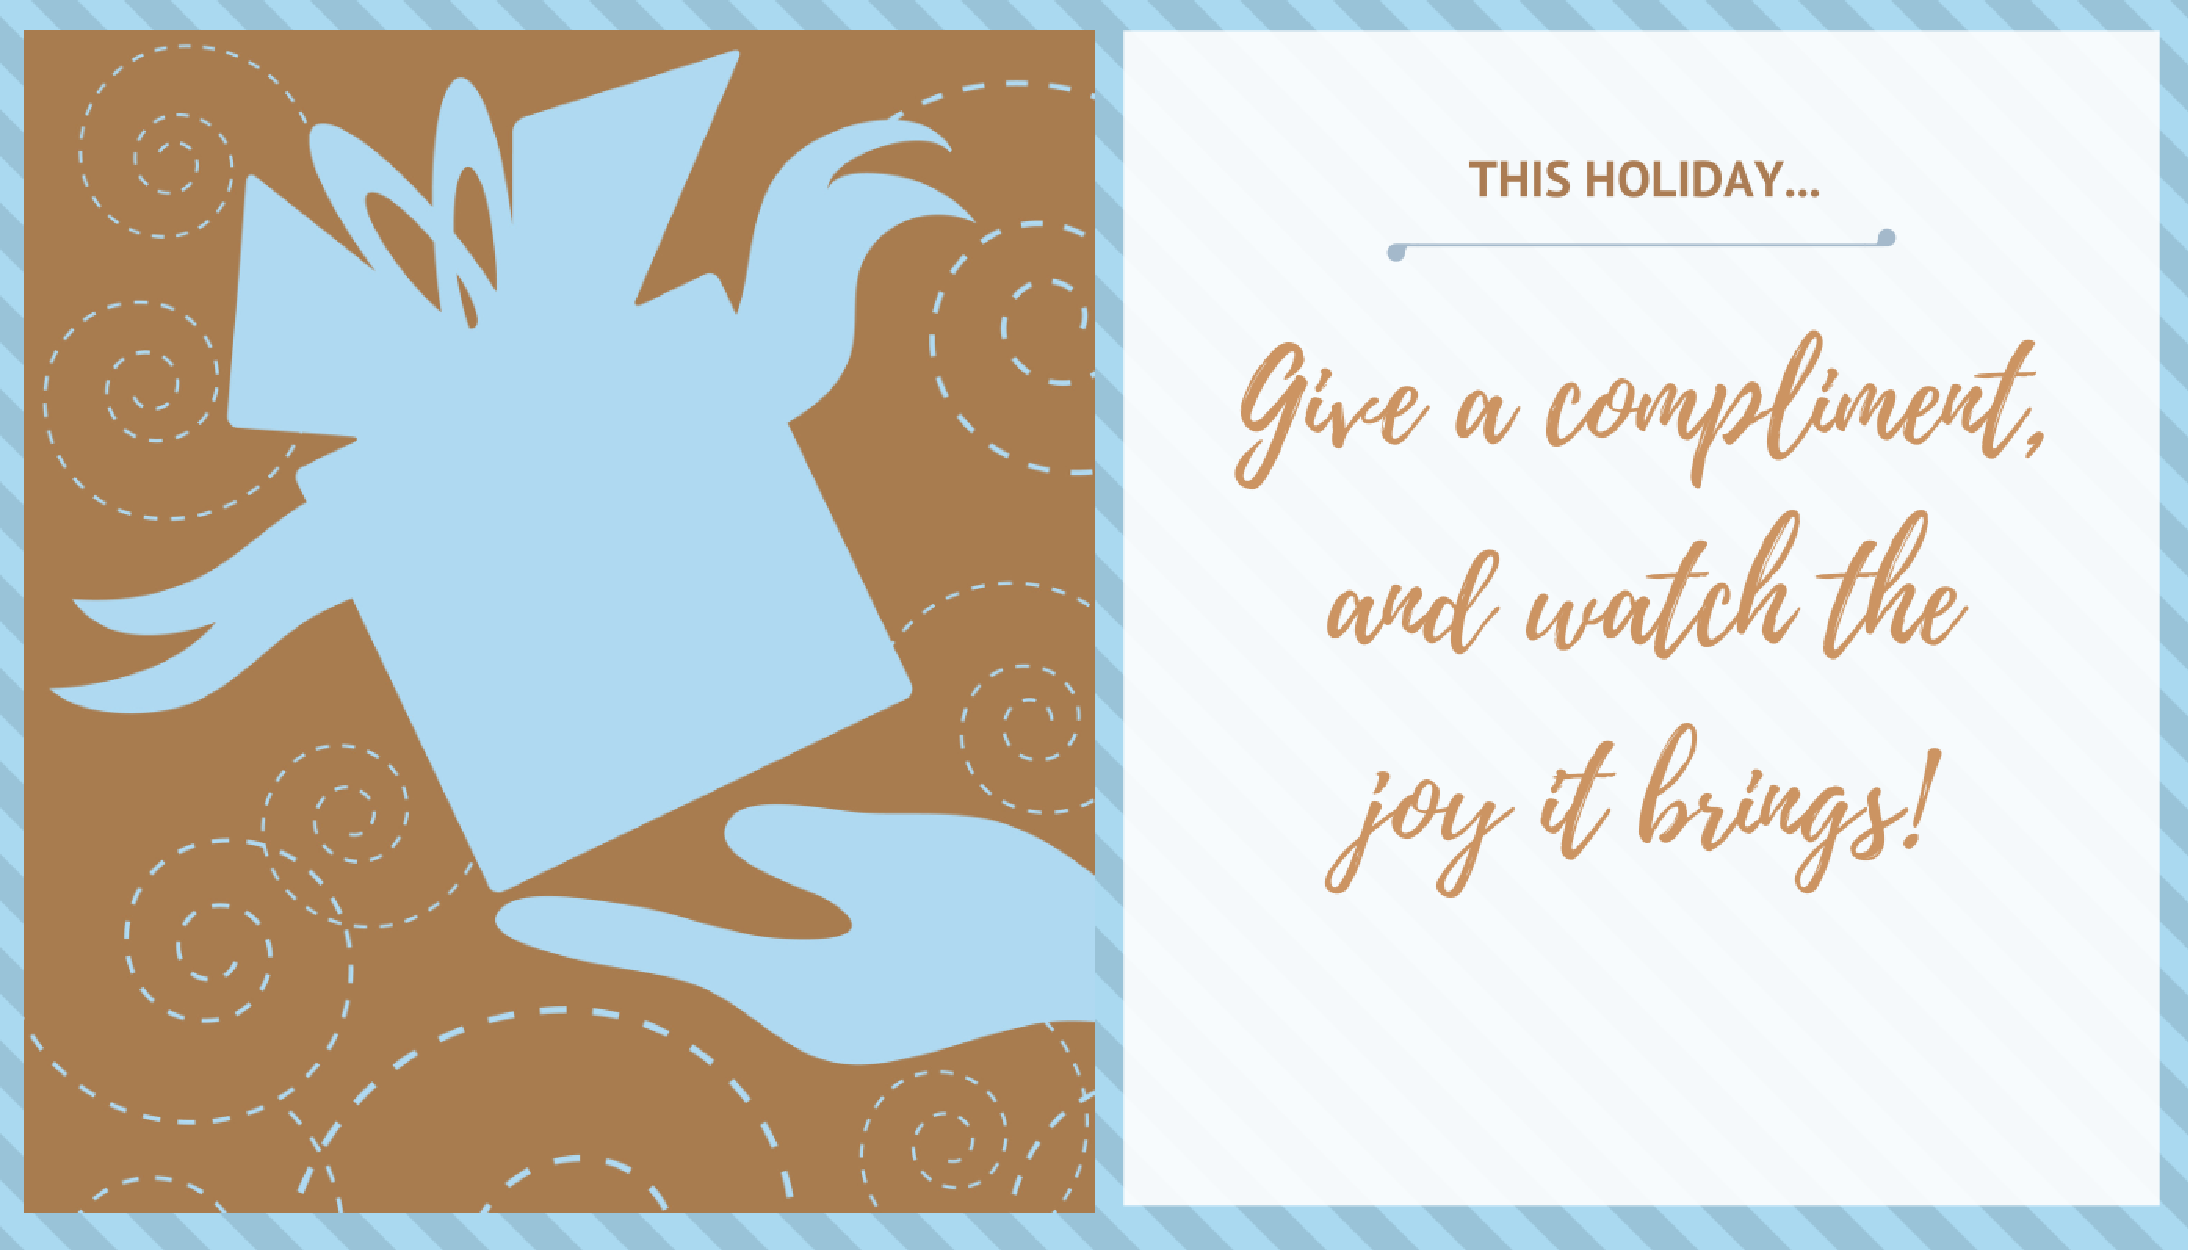 Graphic that says "This holiday, give a compliment and watch the joy it brings!"